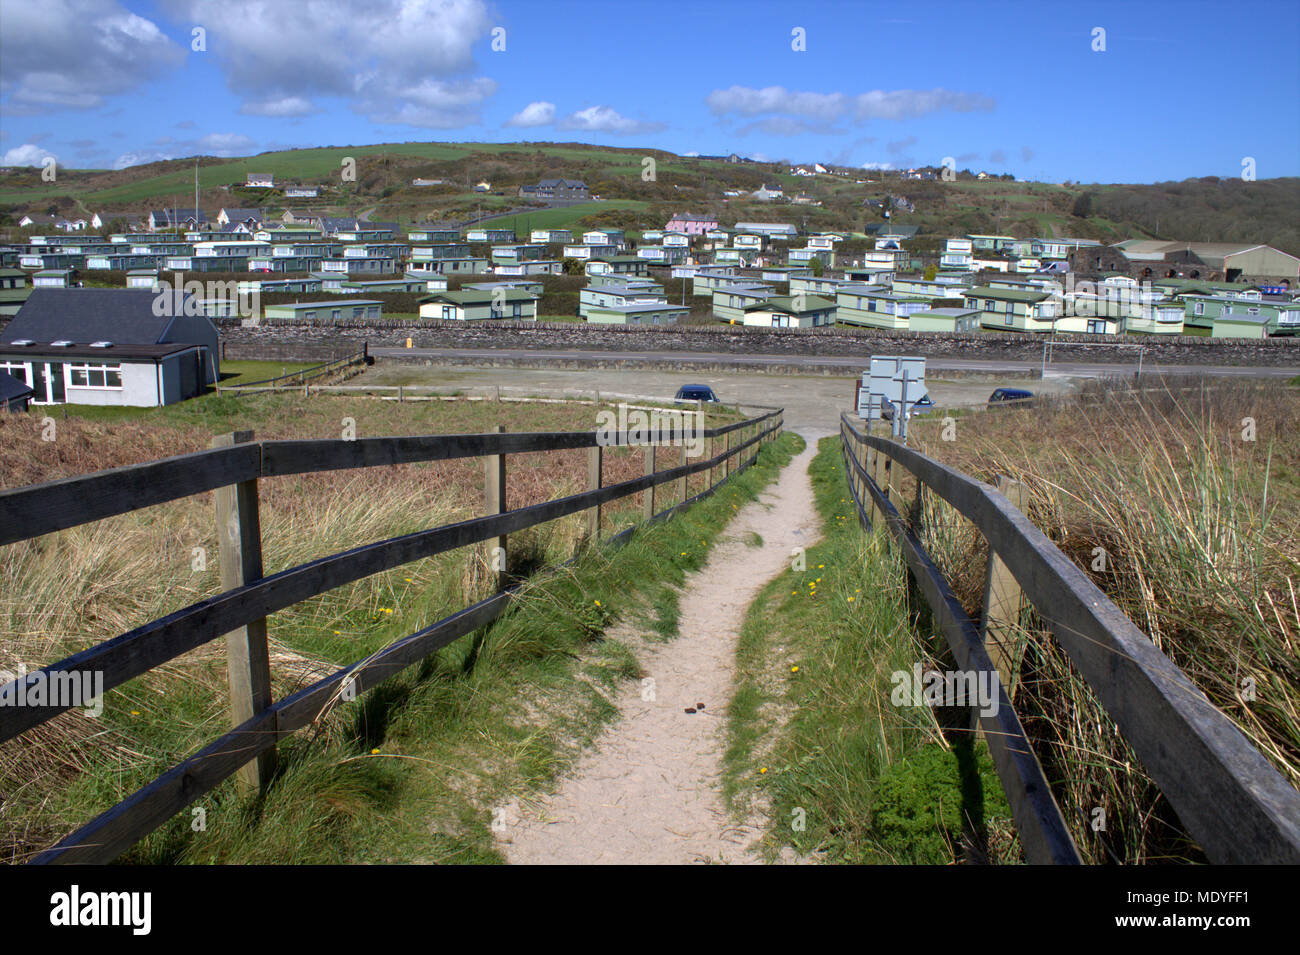 sandy footpath with wooden railings leading back from Owenahincha Beach in county cork, ireland to a large caravan park, a tourist and holiday resort. Stock Photo